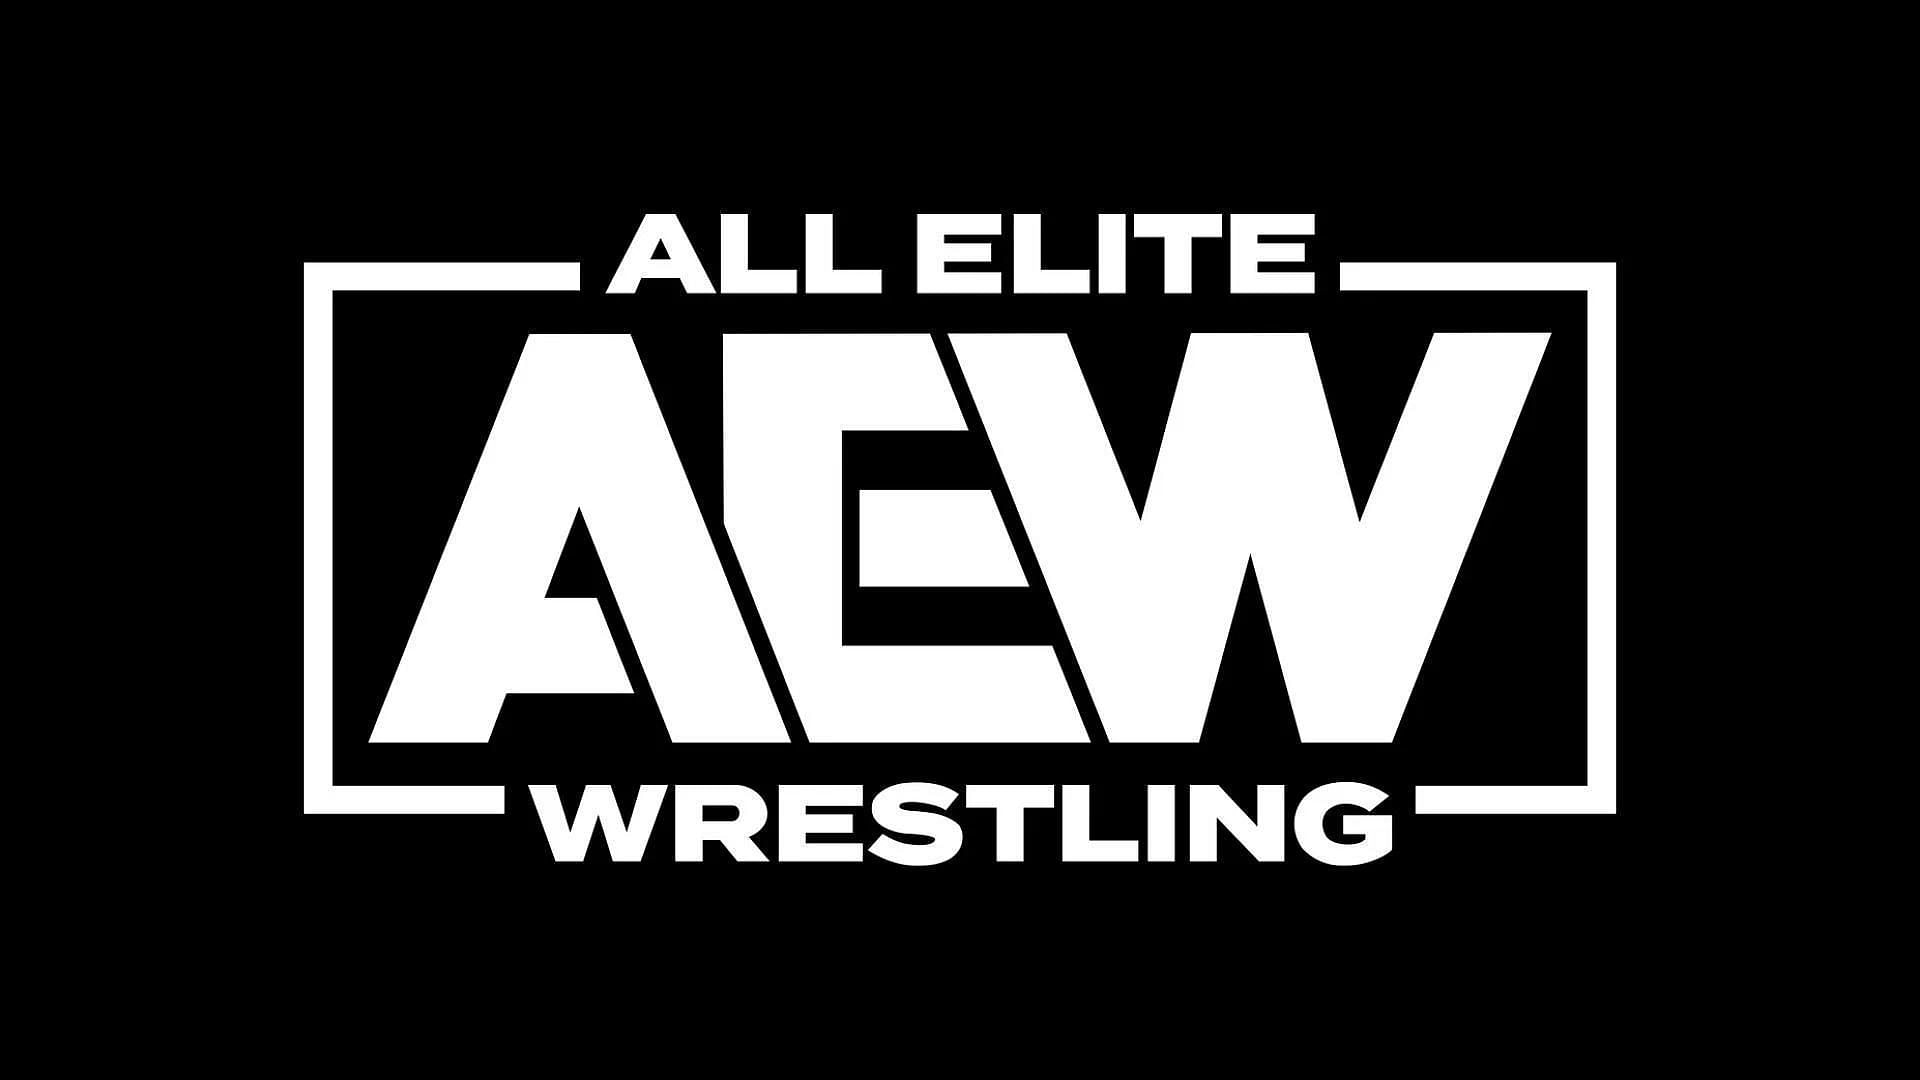 Another AEW tag team has gone their separate ways